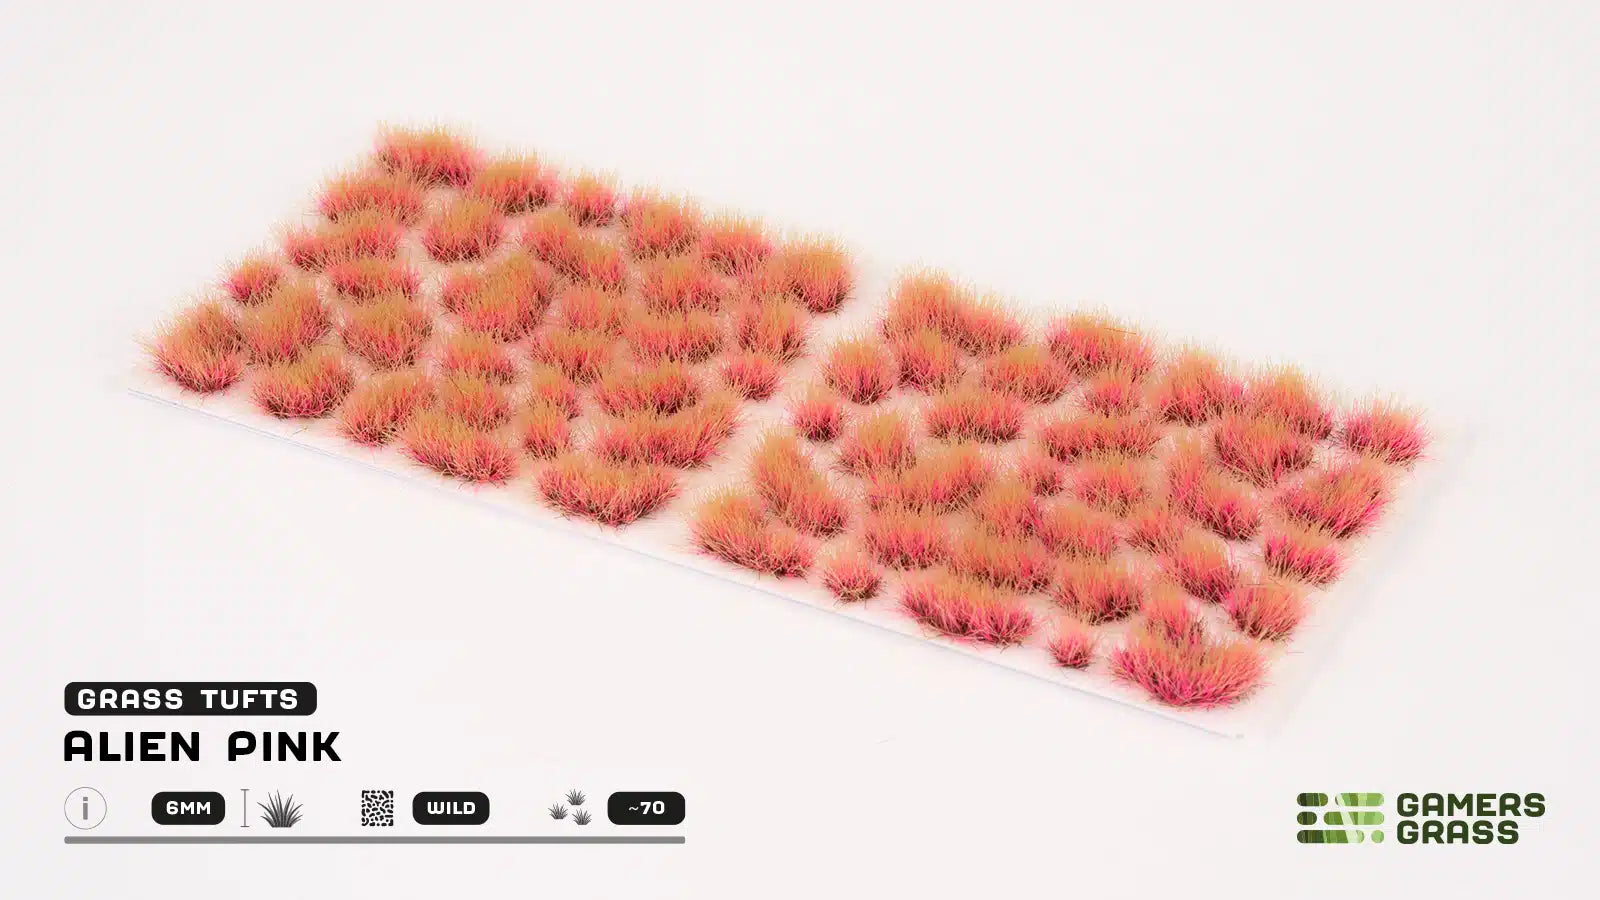 Alien Pink 6mm Tufts - Wild | Eastridge Sports Cards & Games